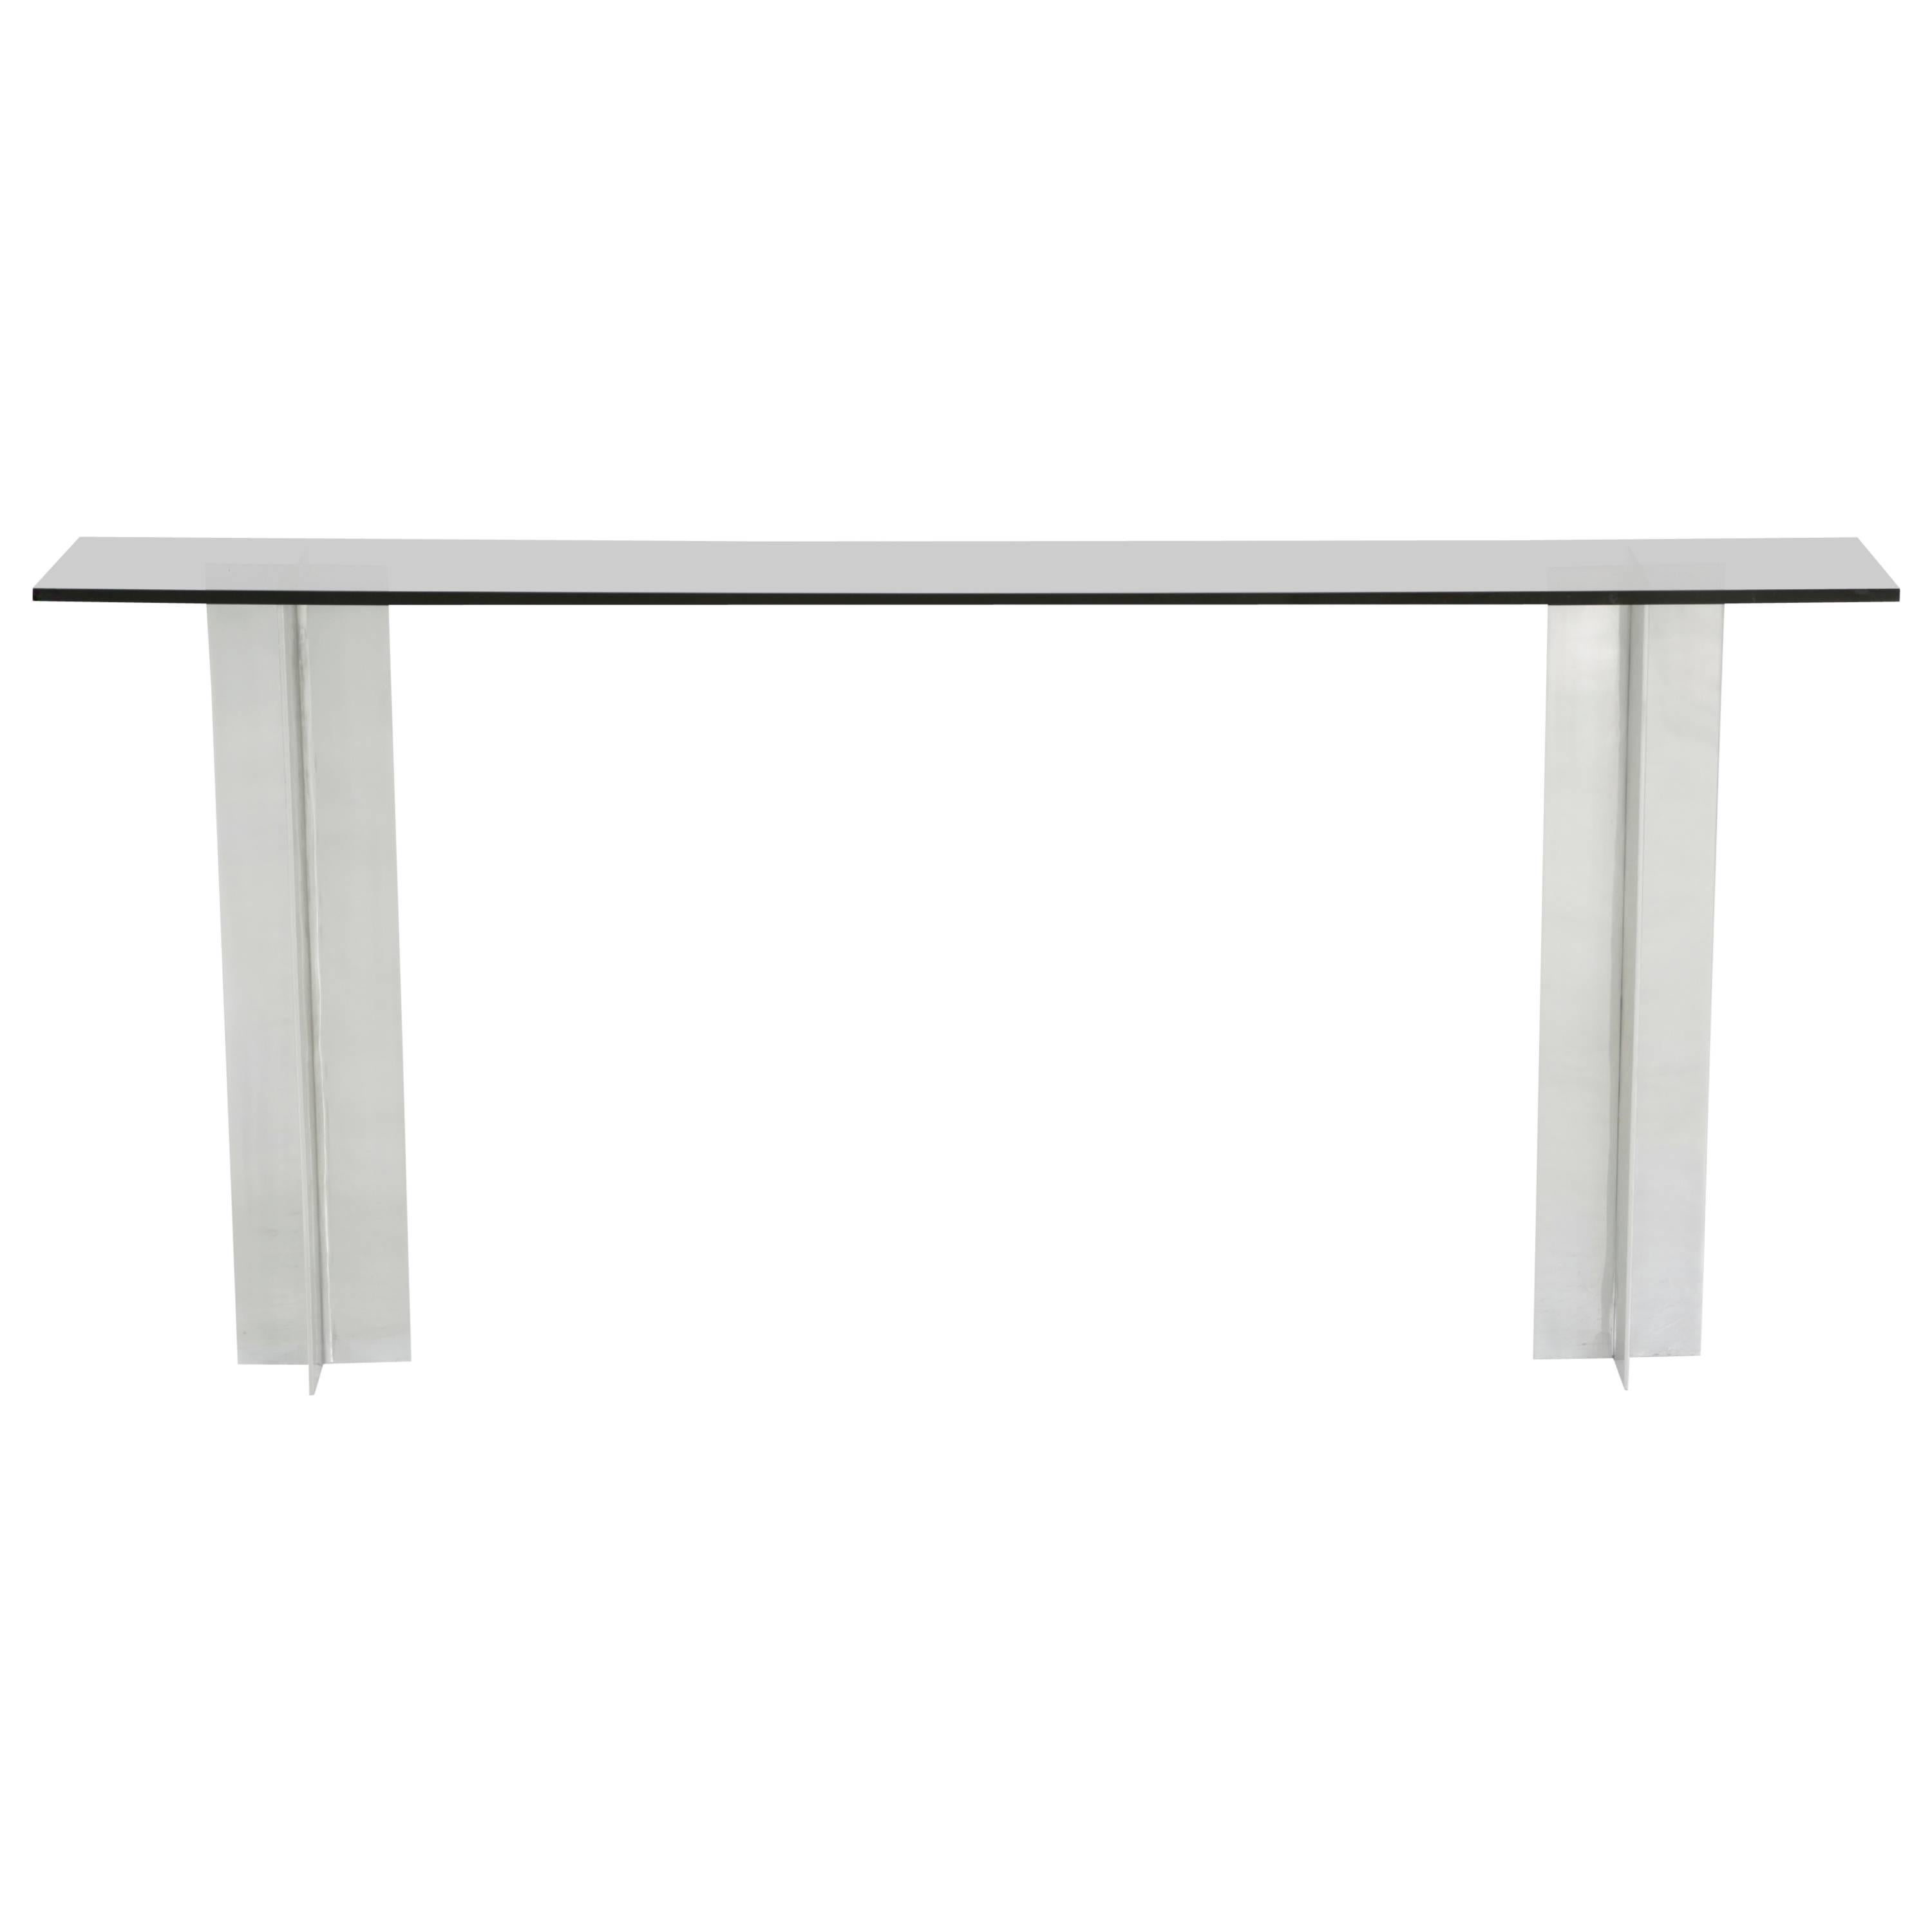 Smoked Glass and Aluminium Console Table Attributed to Pace Manufacturing